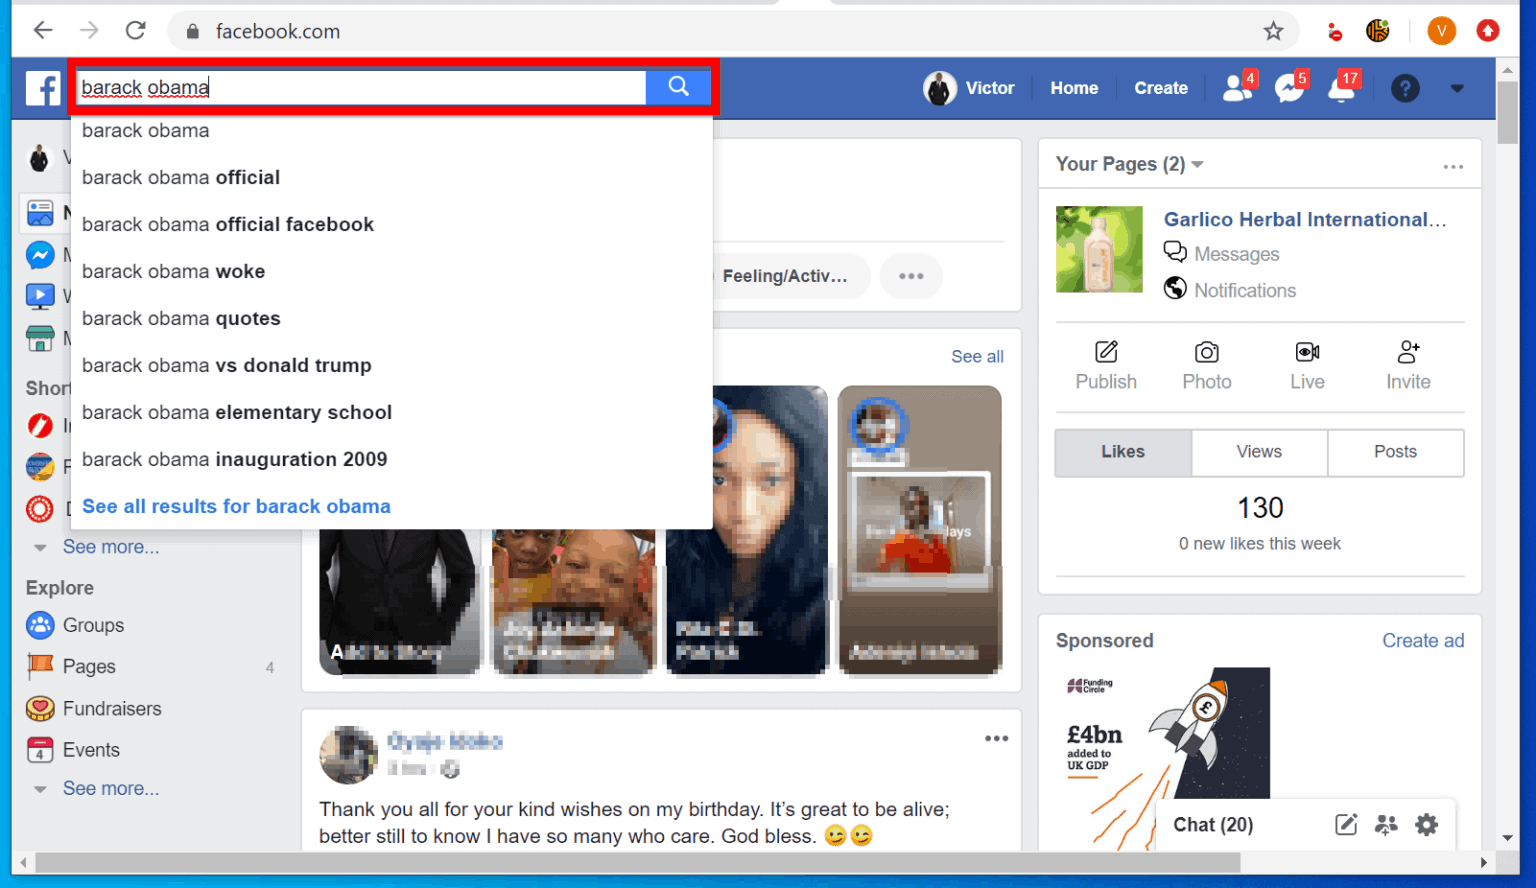 How to Follow Someone on Facebook (PC or the Facebook App)